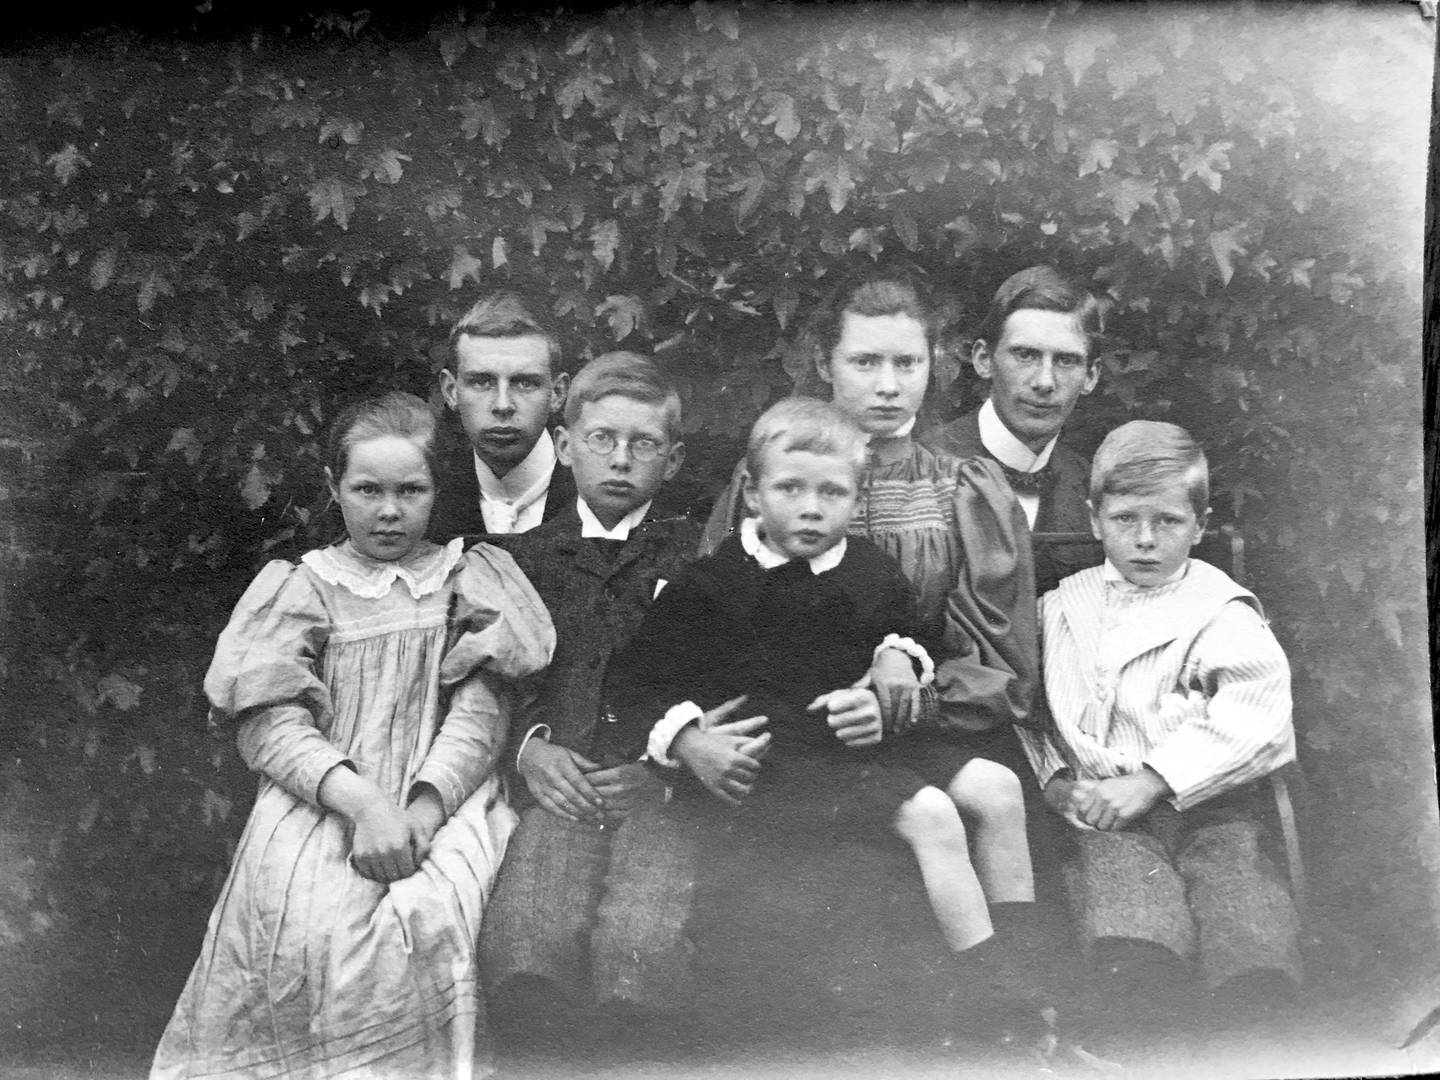 The Marsh siblings – Sylvia, Cecil, Victor, Kenneth, Maria, Oswald and Arnold. Photograph: Supplied by Lilliput Press